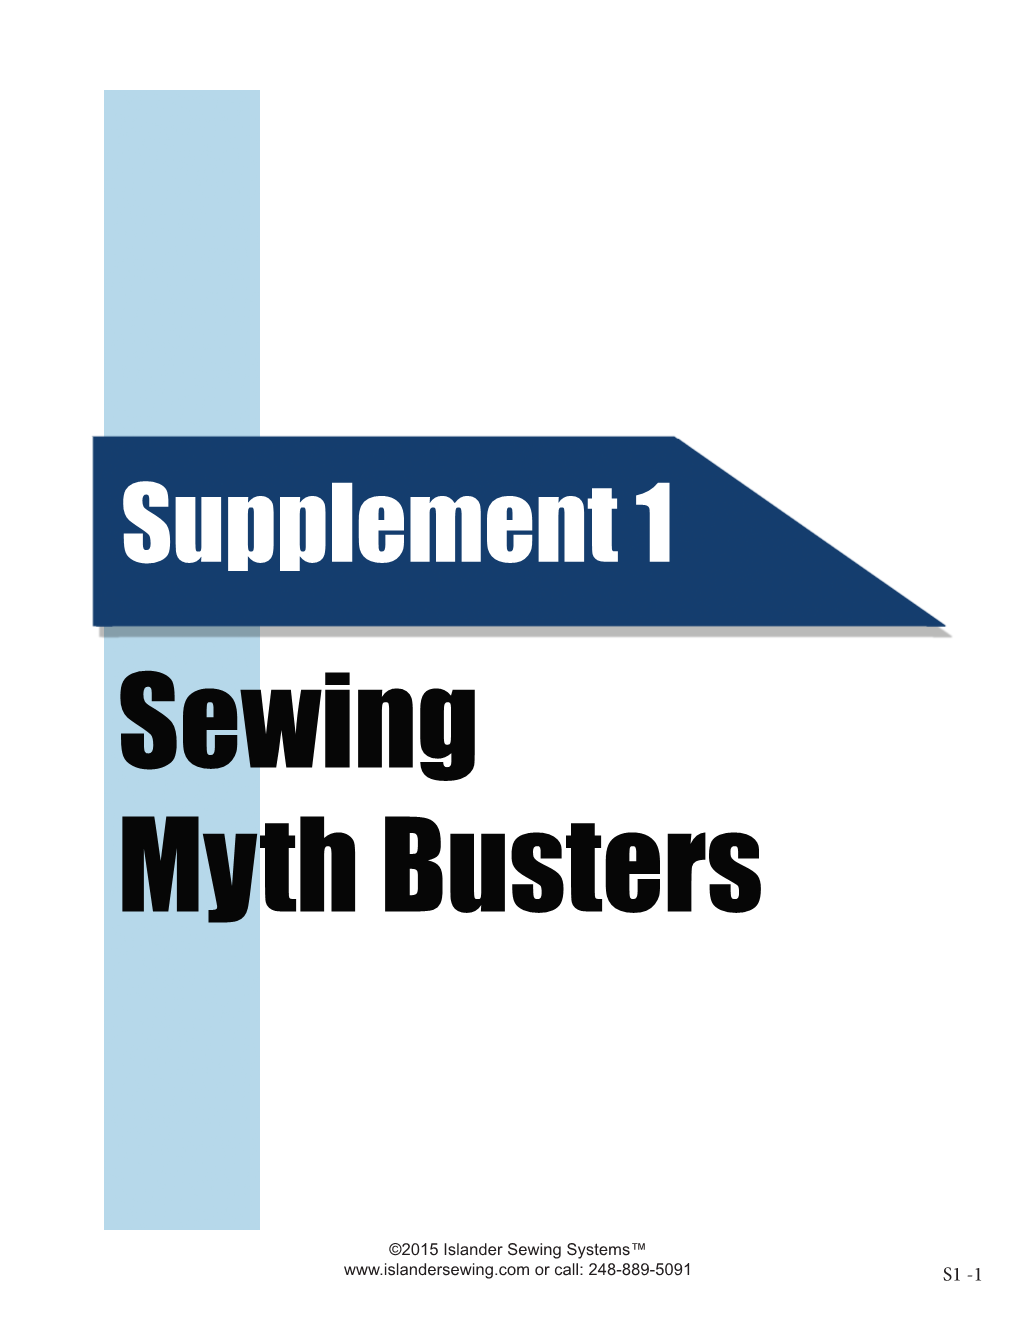 Supplement 1 Sewing Myth Busters